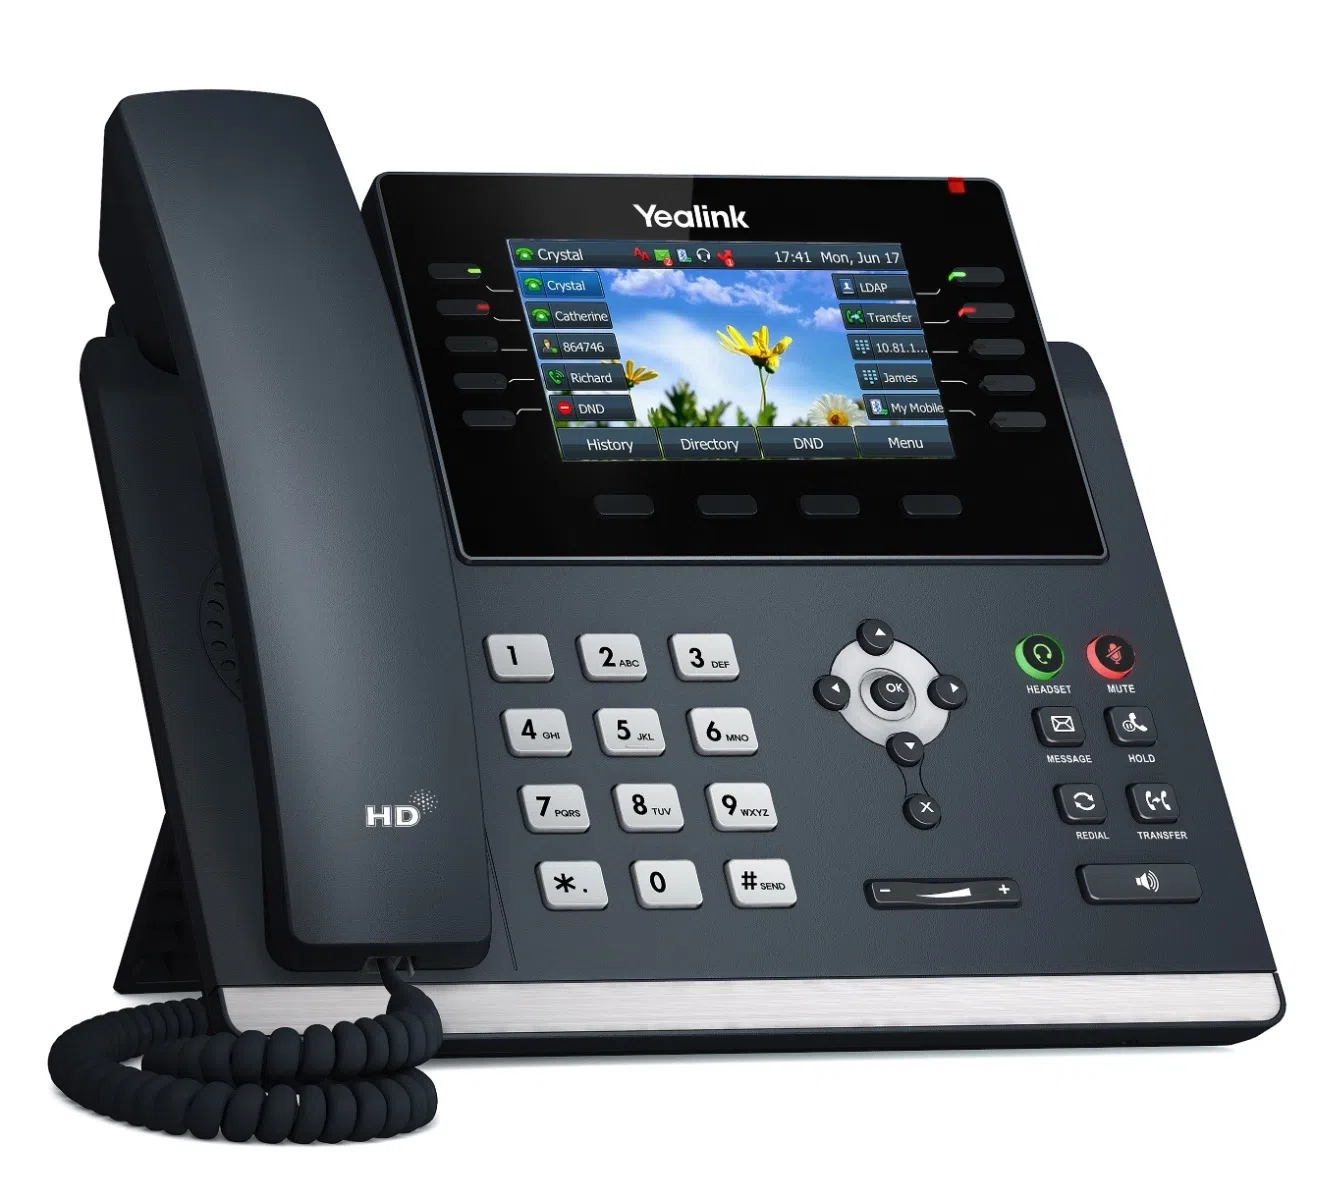 Who manufactures the Yealink T46U, also known as the SIP-T46U IP Phone 1301203?